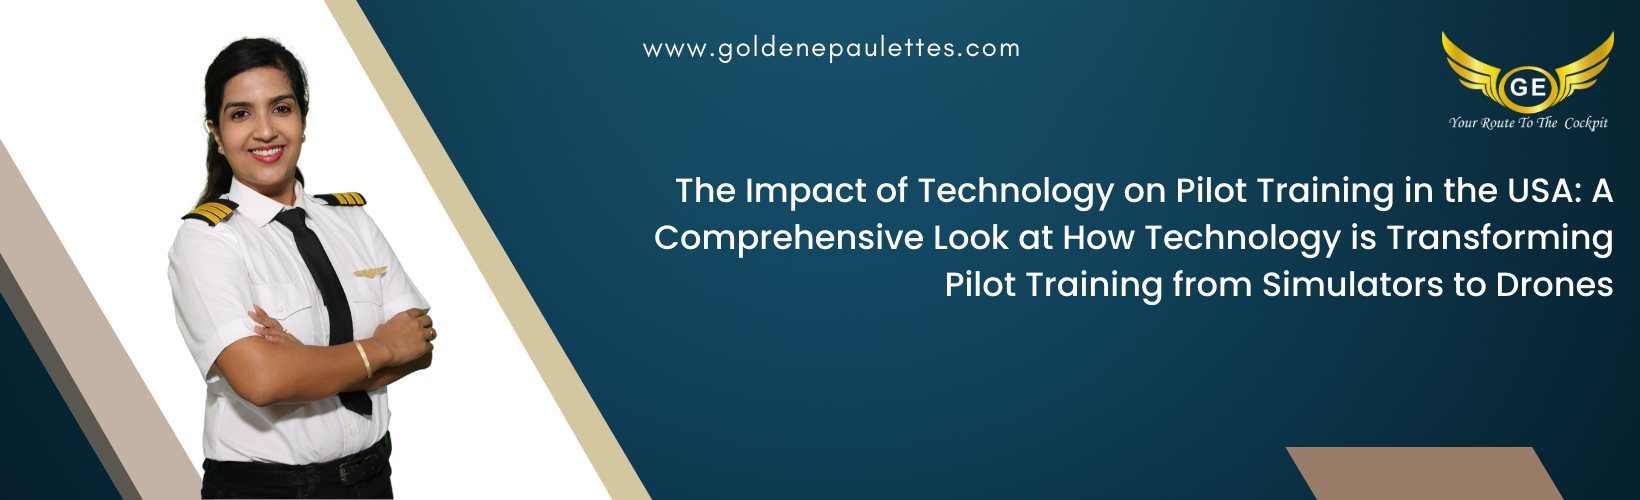 The Role of Technology in Pilot Training in the USA